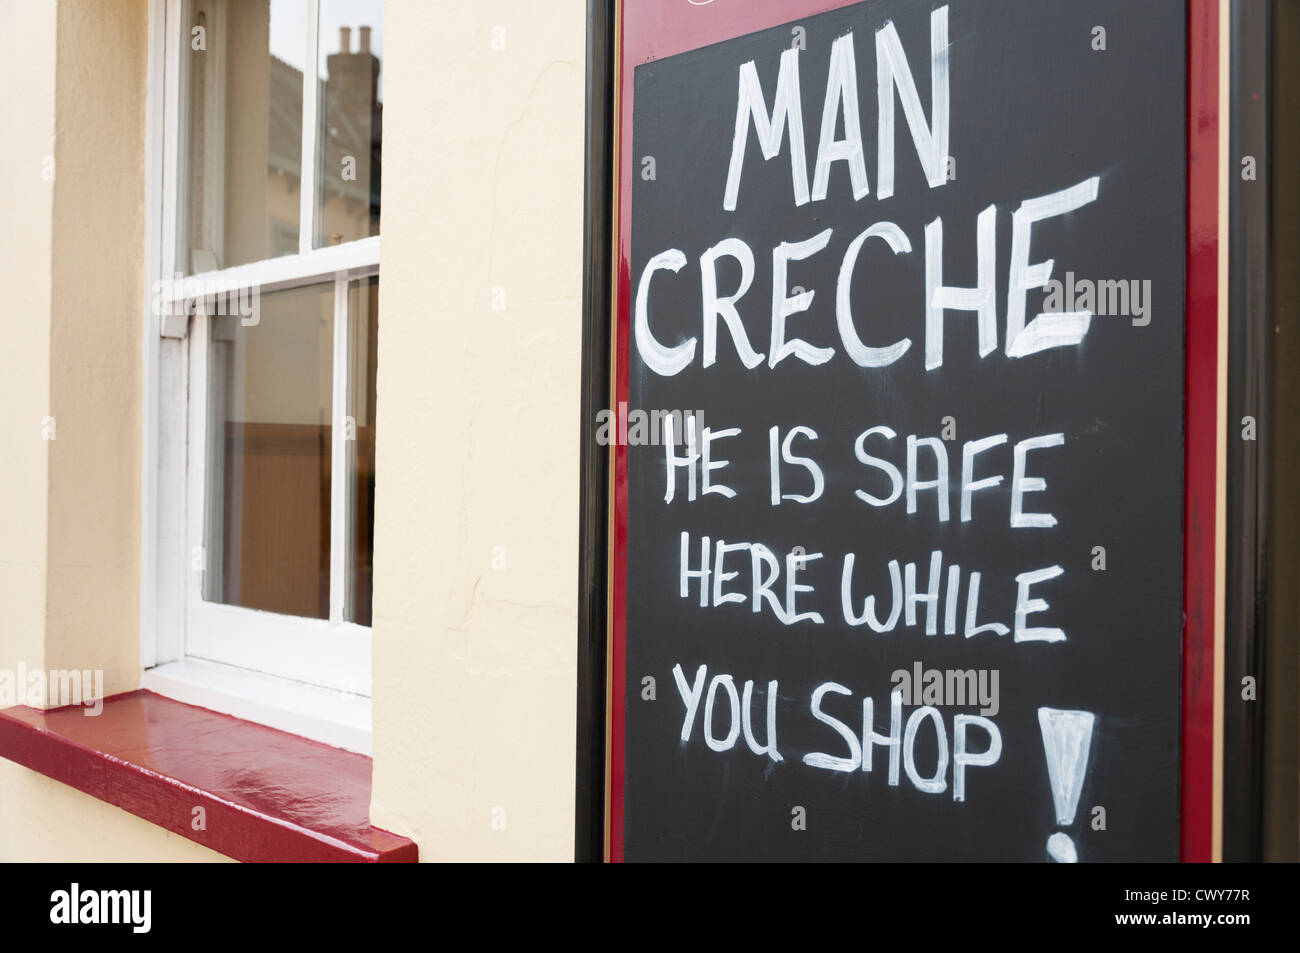 Funny pub sign offering Man Creche for women wanting to shop. Stock Photo